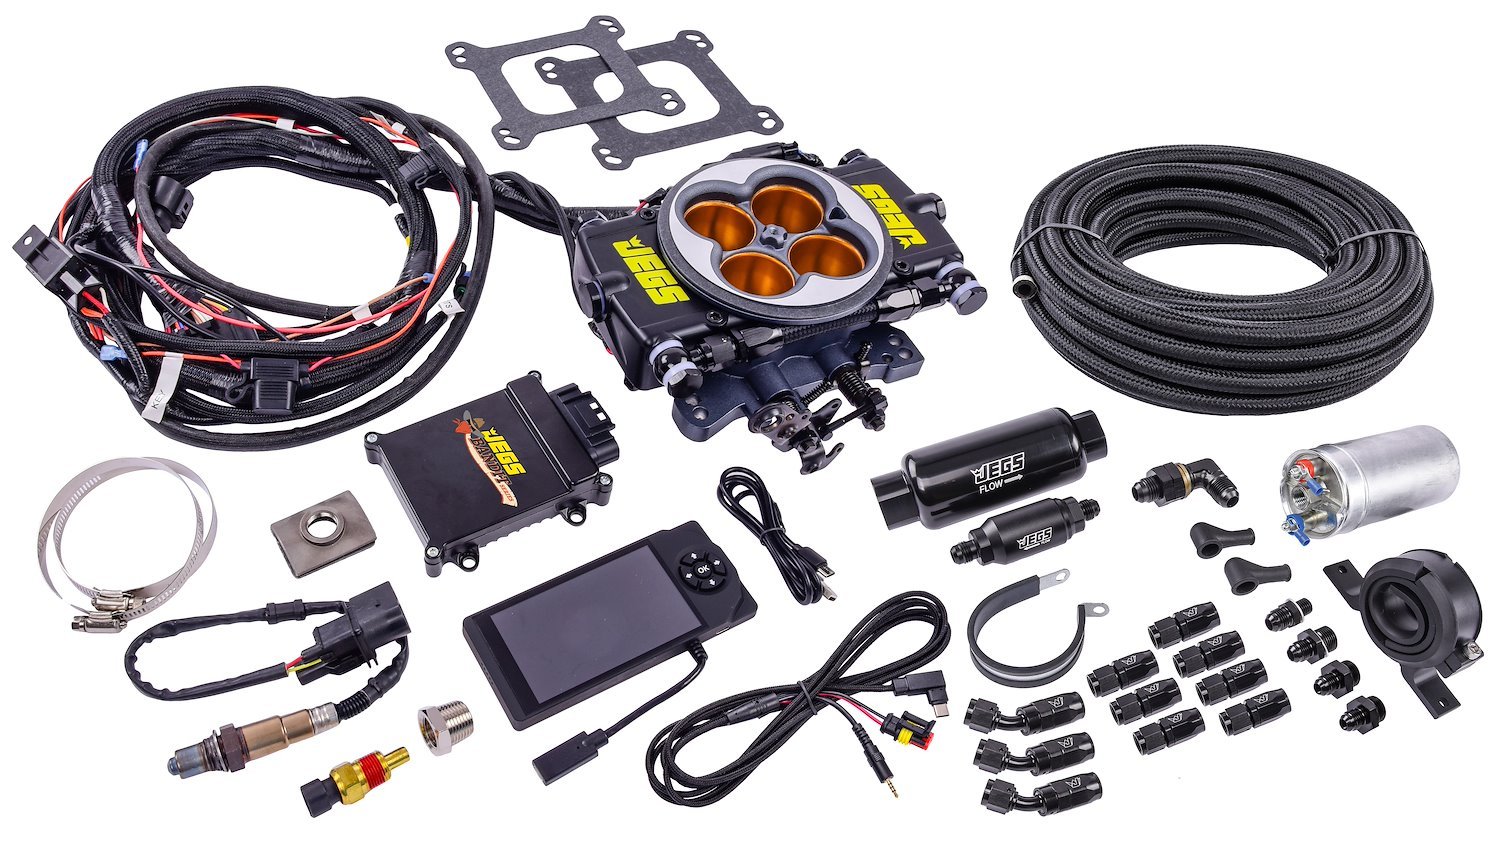 Bandit EFI with Braided Hose Fuel System Kit